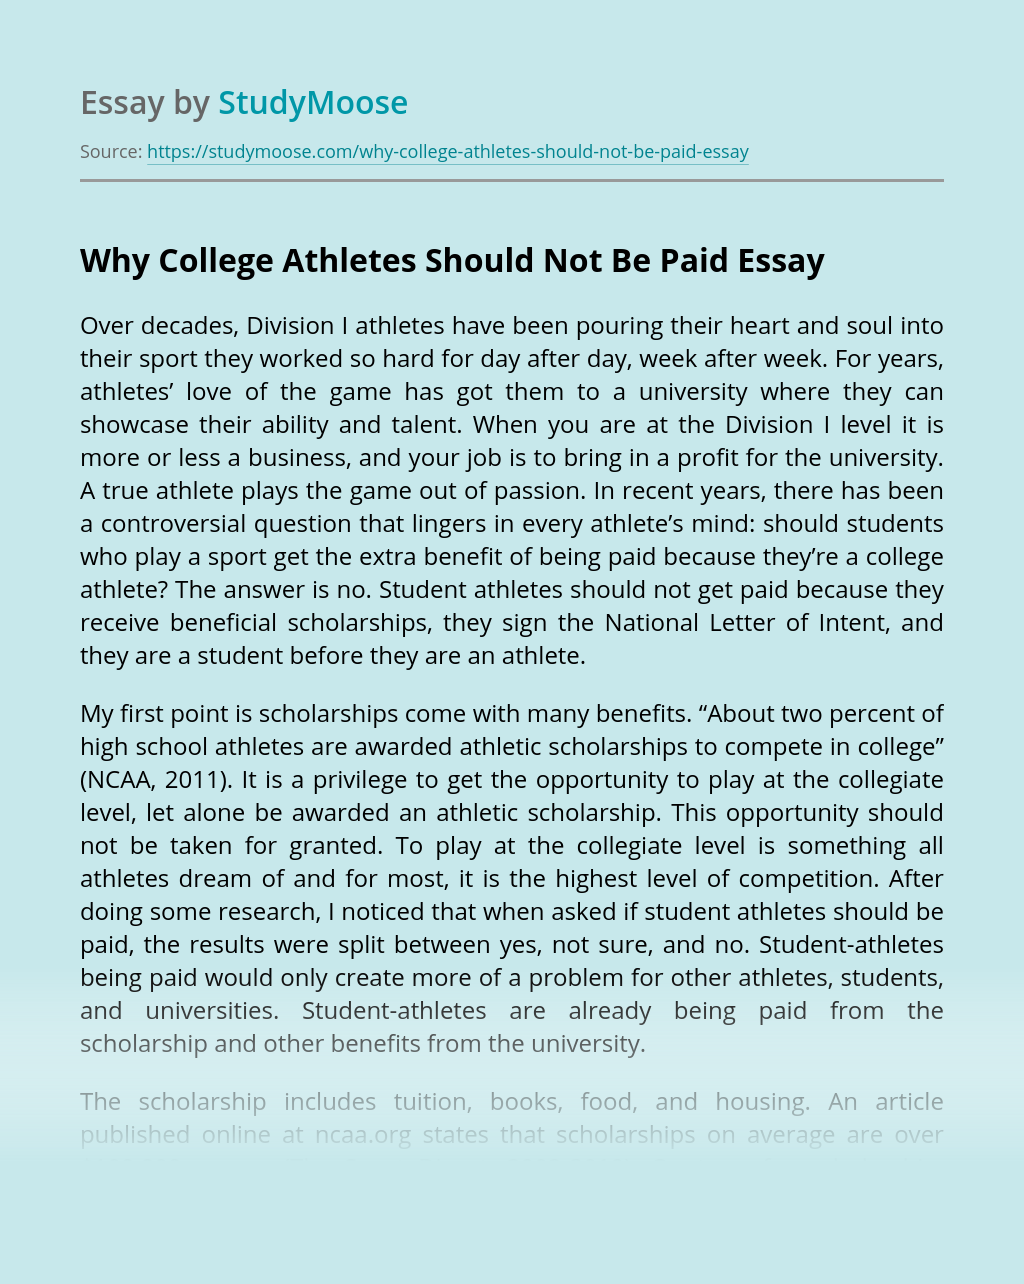 essay examples: Should College Athletes Be Paid Essay